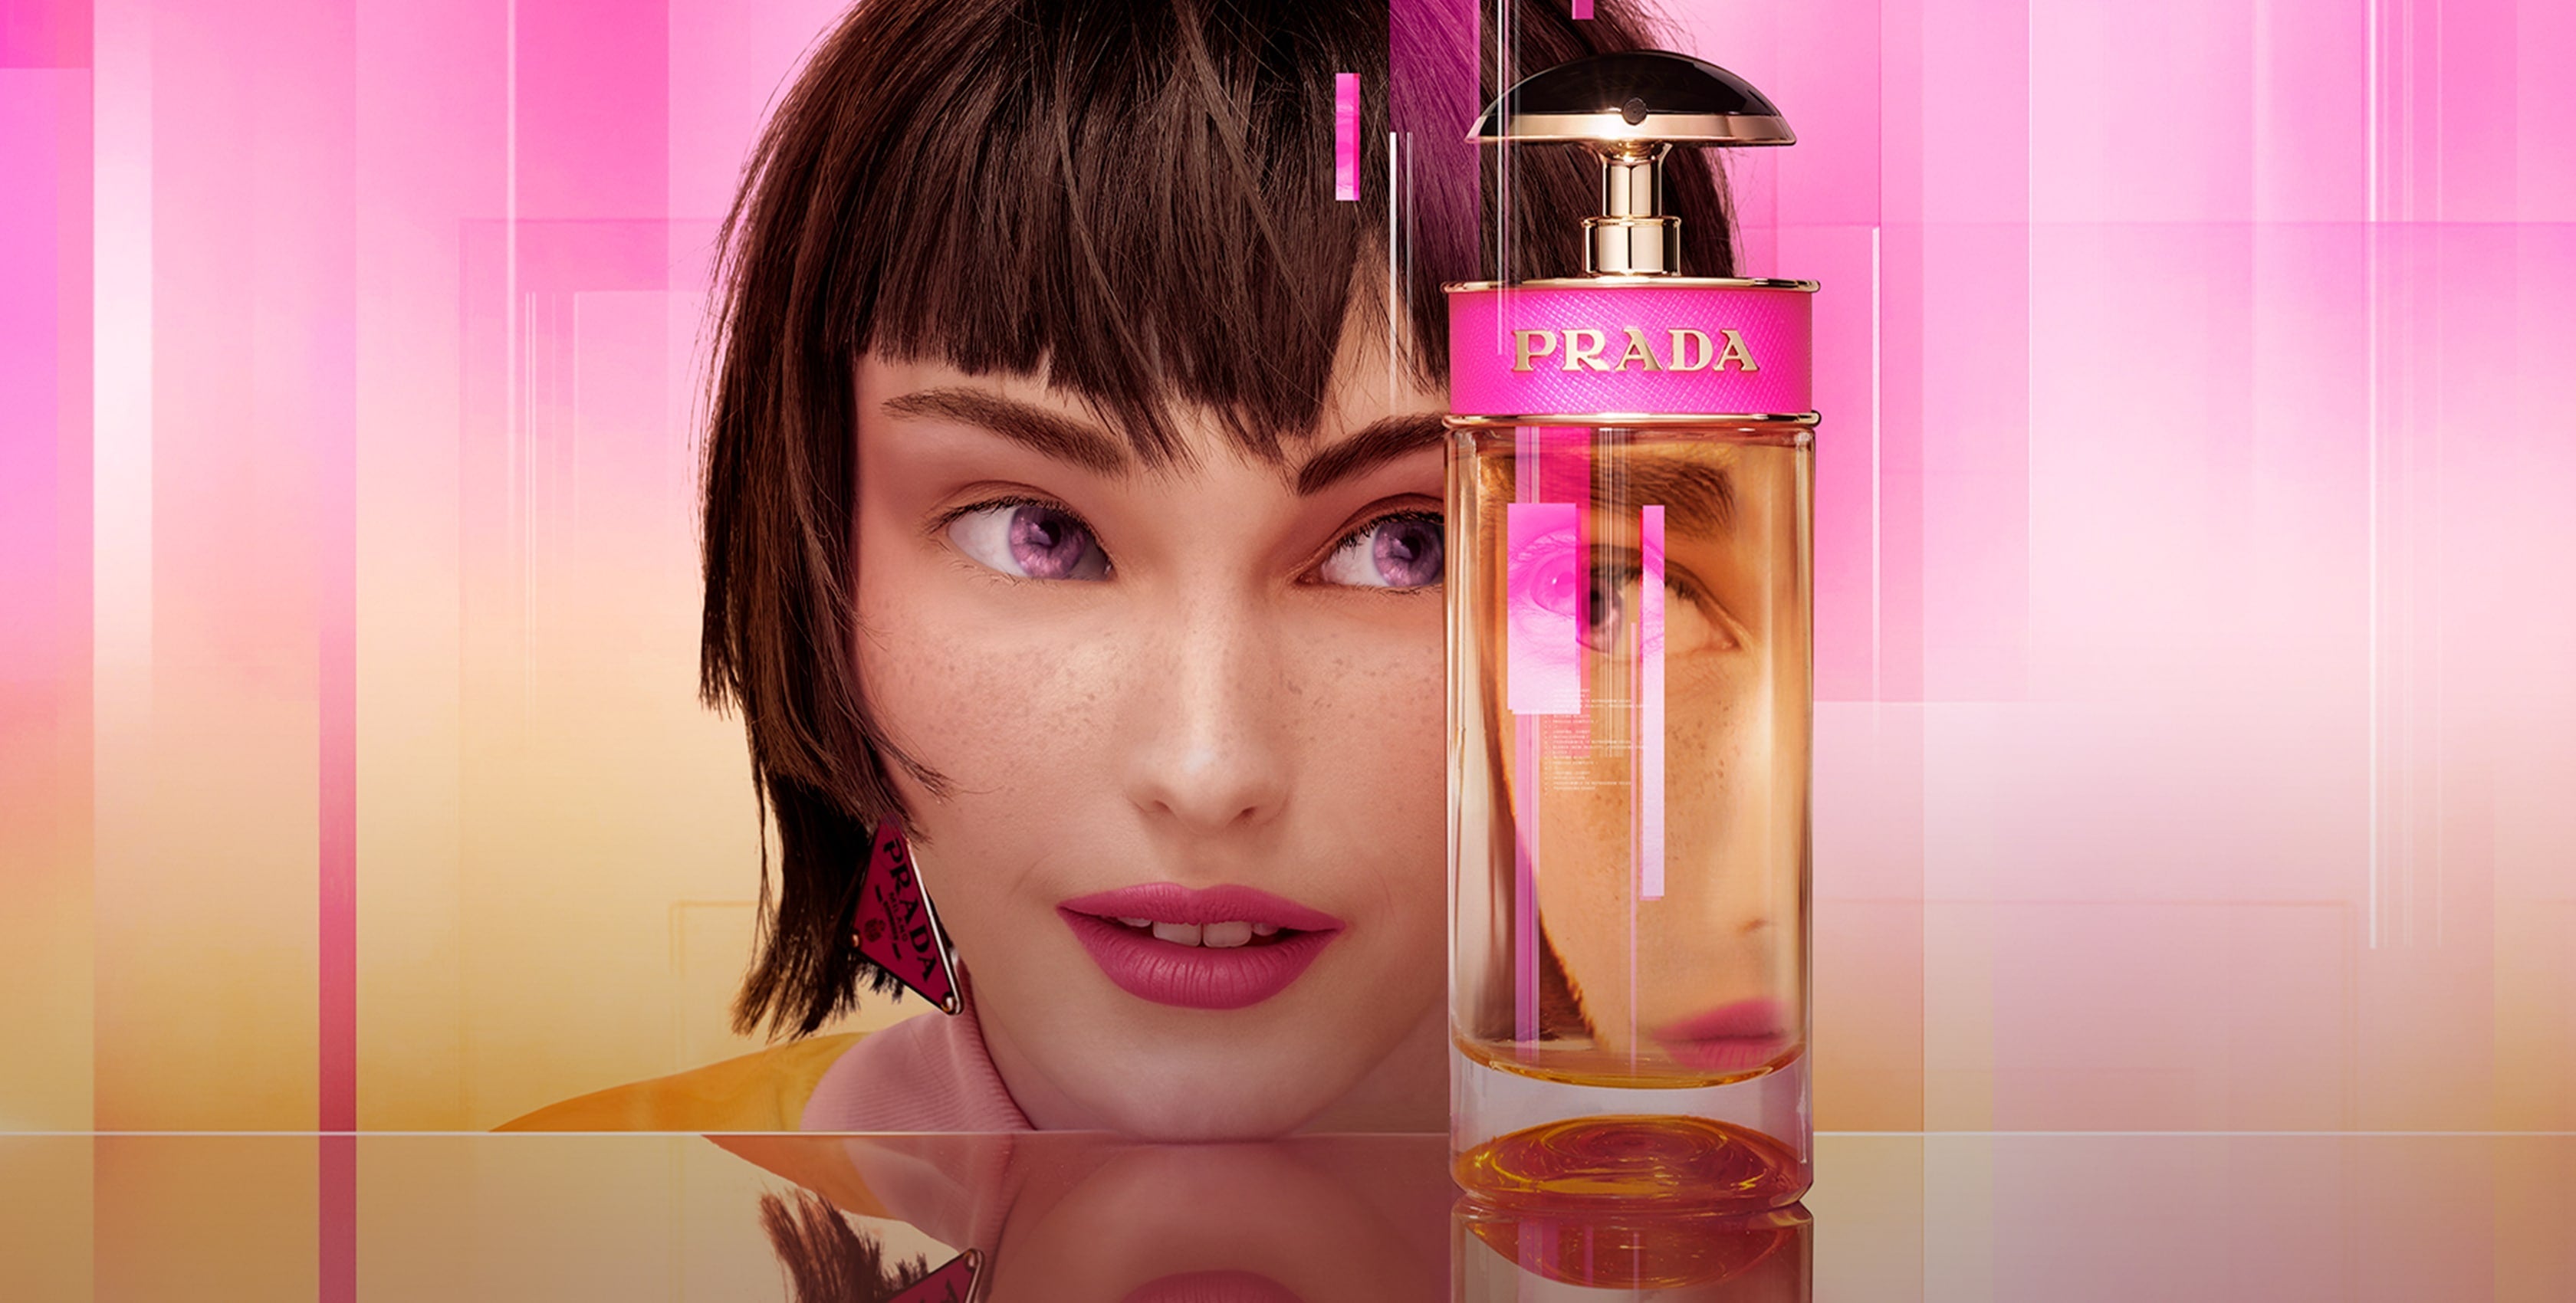 Prada Candy EDP: A Review of the Classic Women's Fragrance